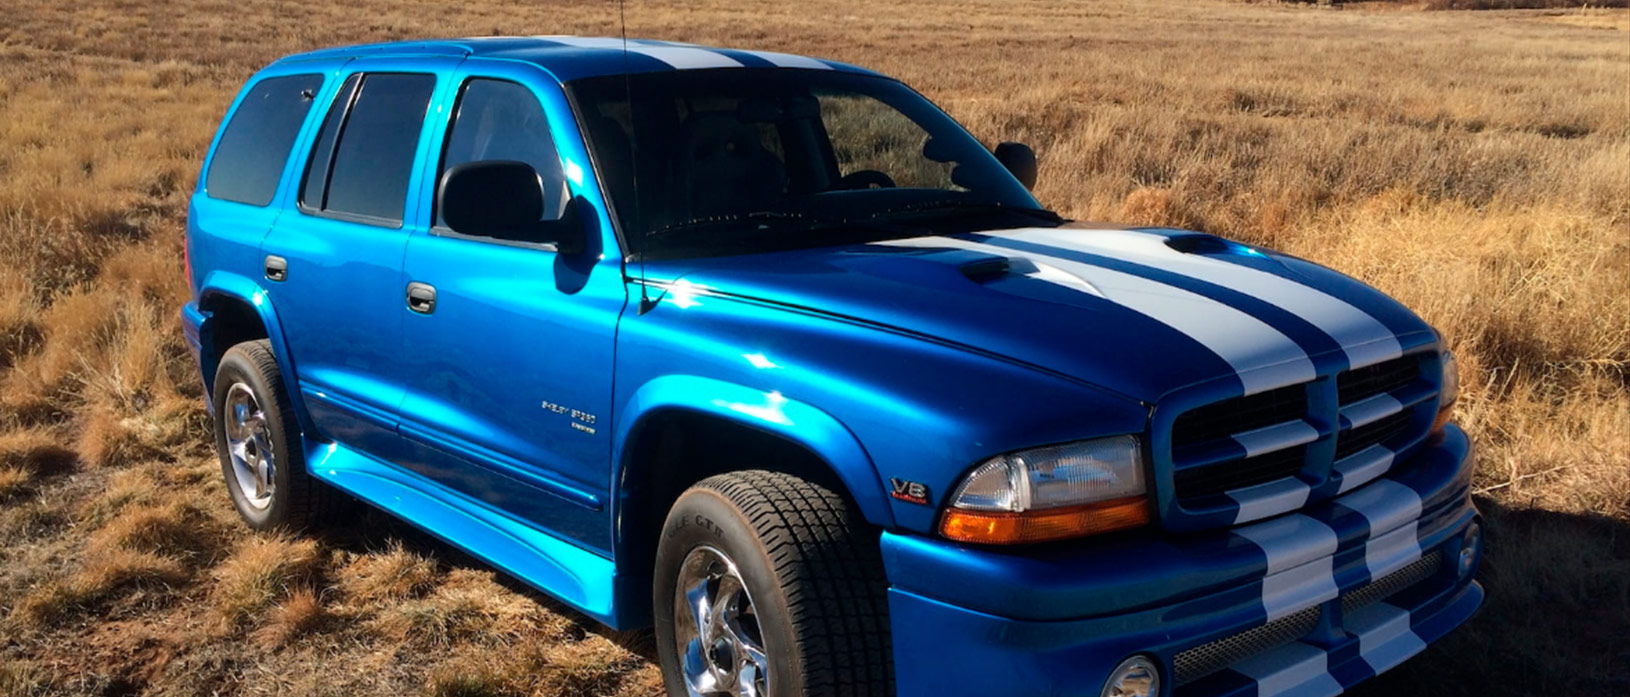 Blue and white 1996 Dodge Shelby Durango